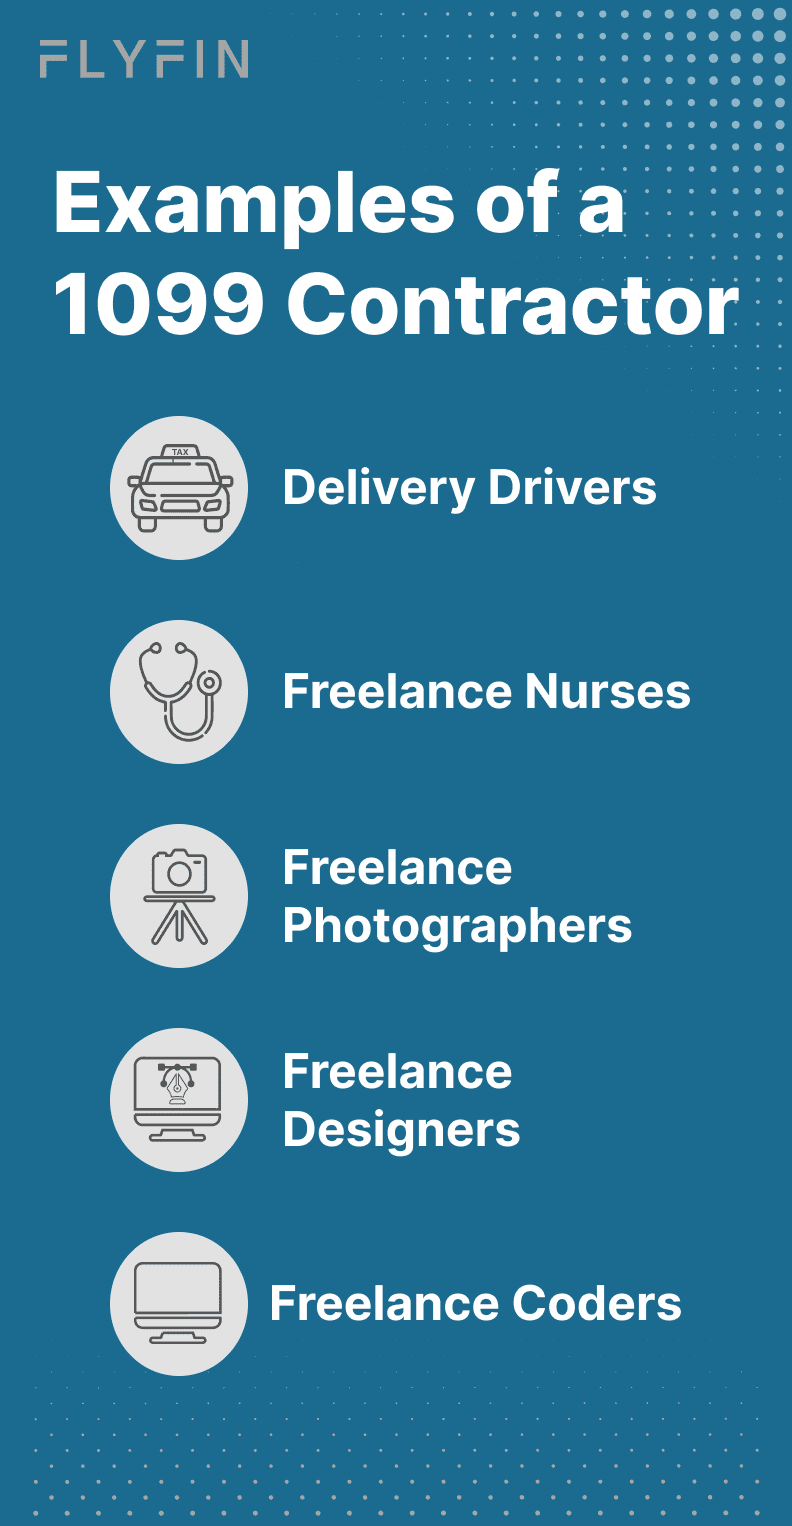 Image showcasing examples of self-employed 1099 contractors including delivery drivers, nurses, photographers, coders, and designers. Keywords: freelancer, taxes.